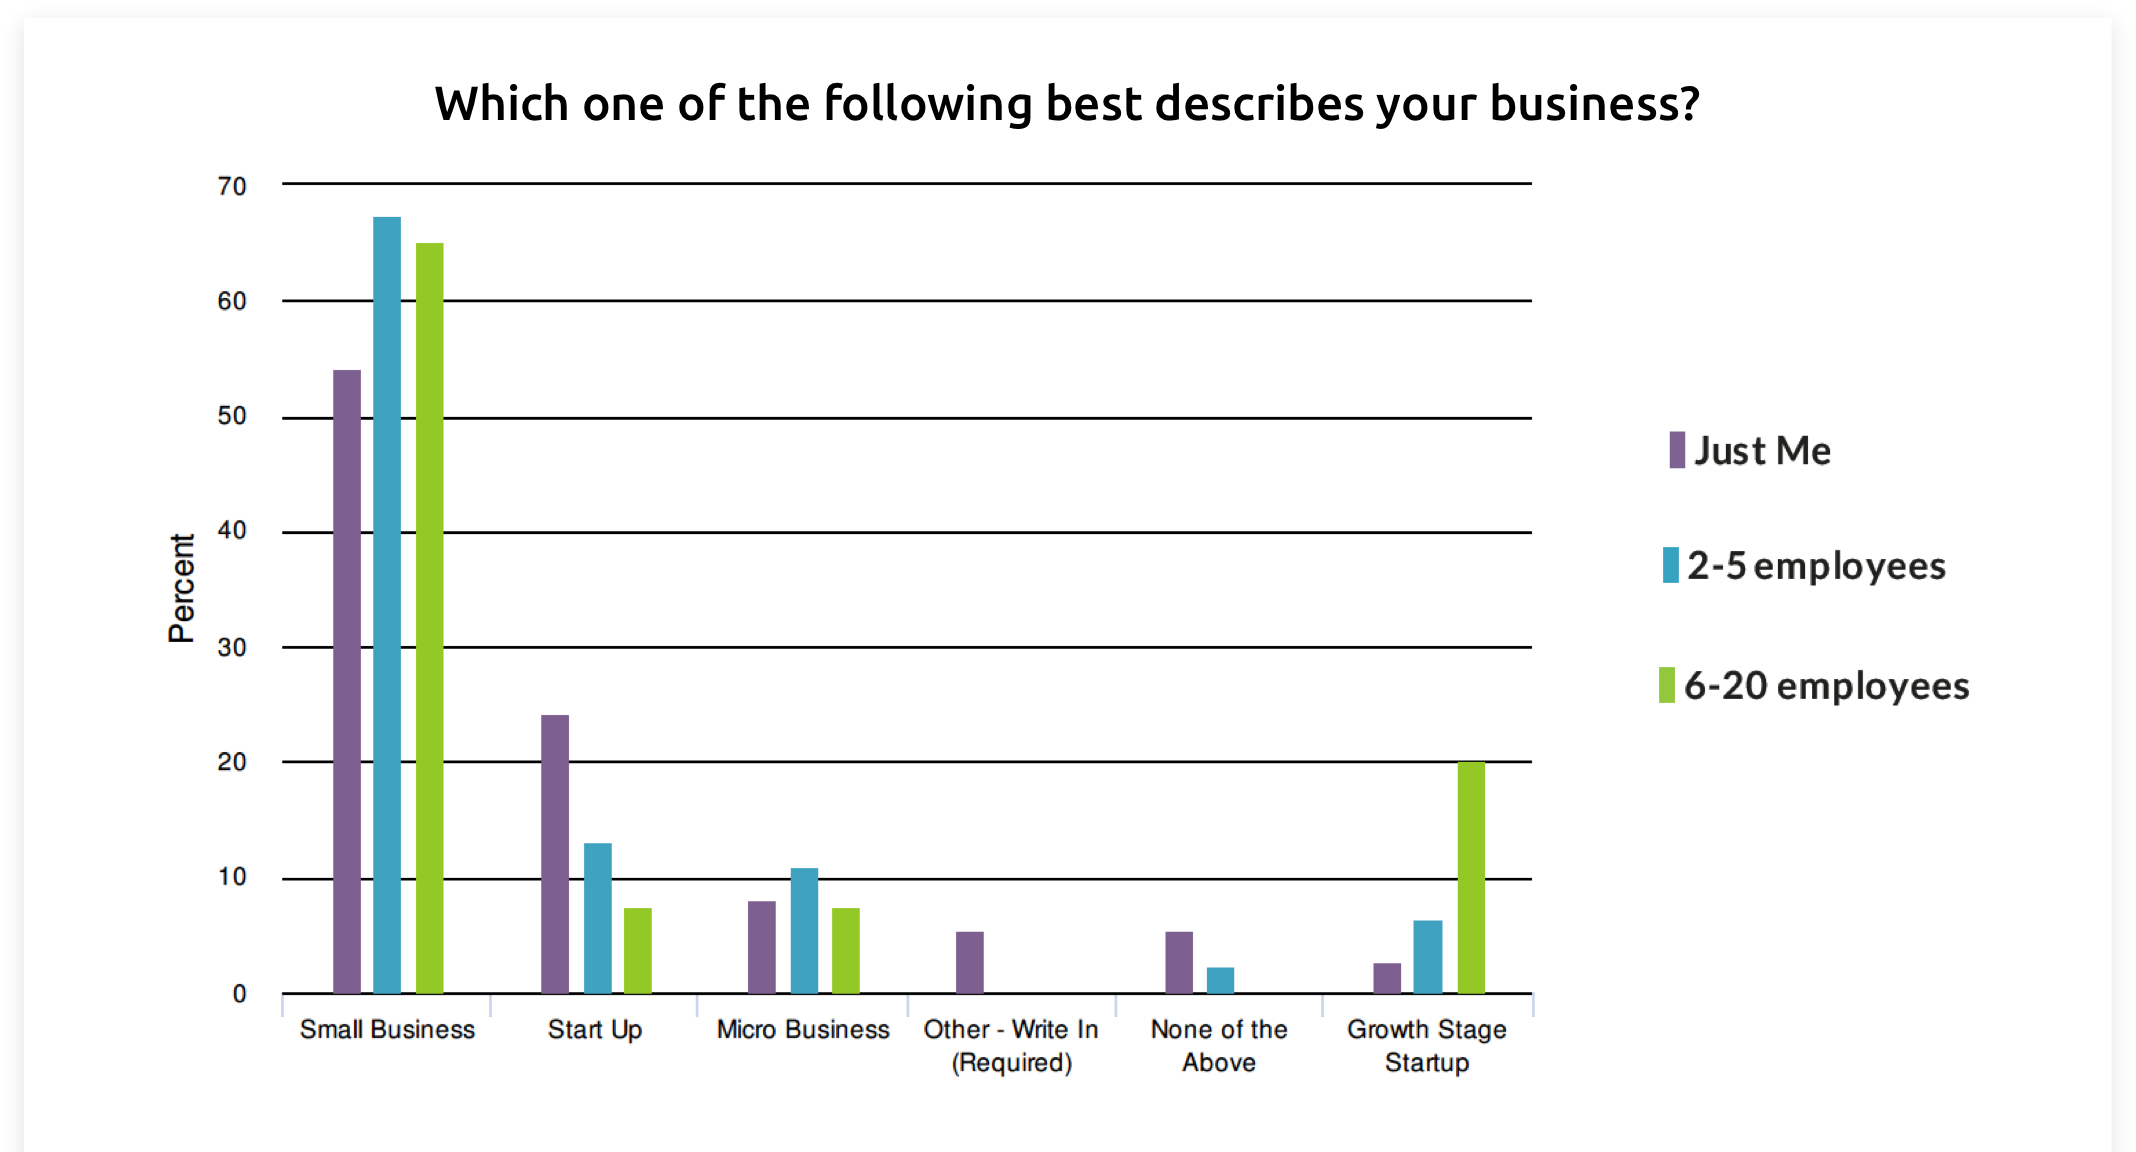 Survey results from market research